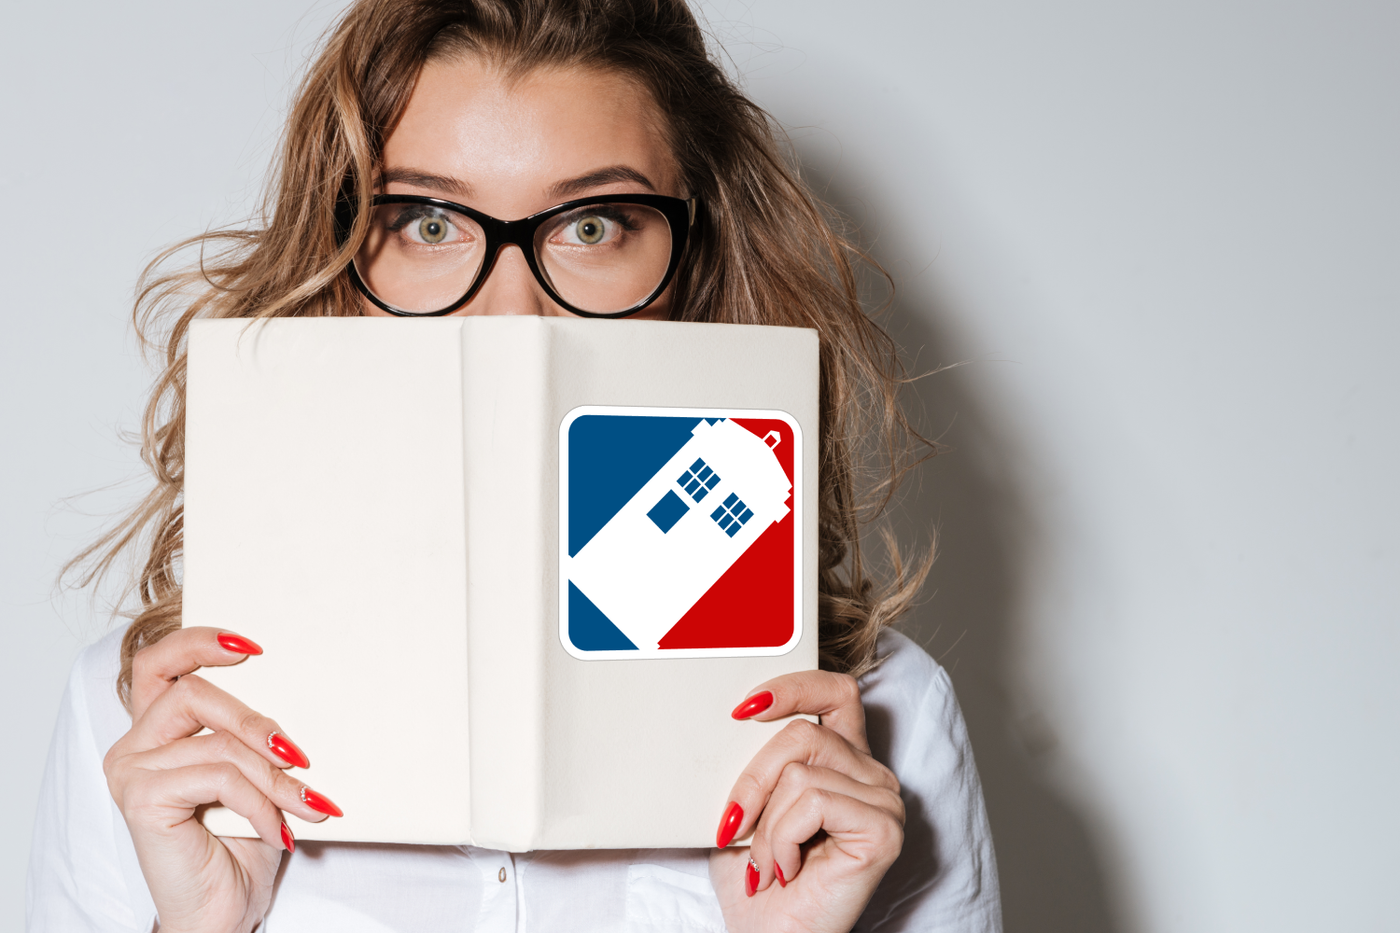 White woman holding a book with a sports parody logo of a phone box